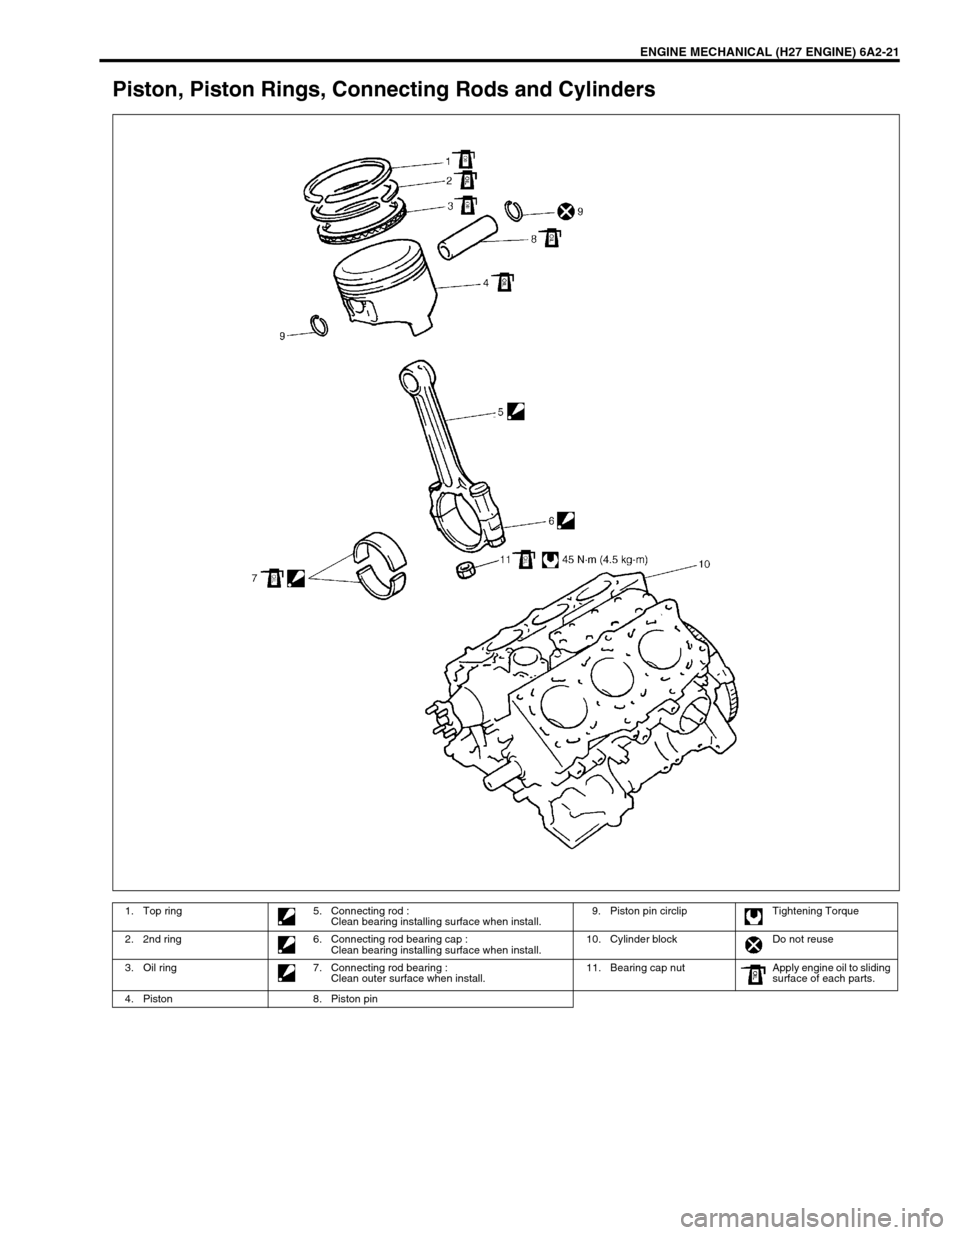 SUZUKI GRAND VITARA 1999 2.G Repair Manual ENGINE MECHANICAL (H27 ENGINE) 6A2-21
Piston, Piston Rings, Connecting Rods and Cylinders
1. Top ring 5. Connecting rod :
Clean bearing installing surface when install.9. Piston pin circlip Tightening